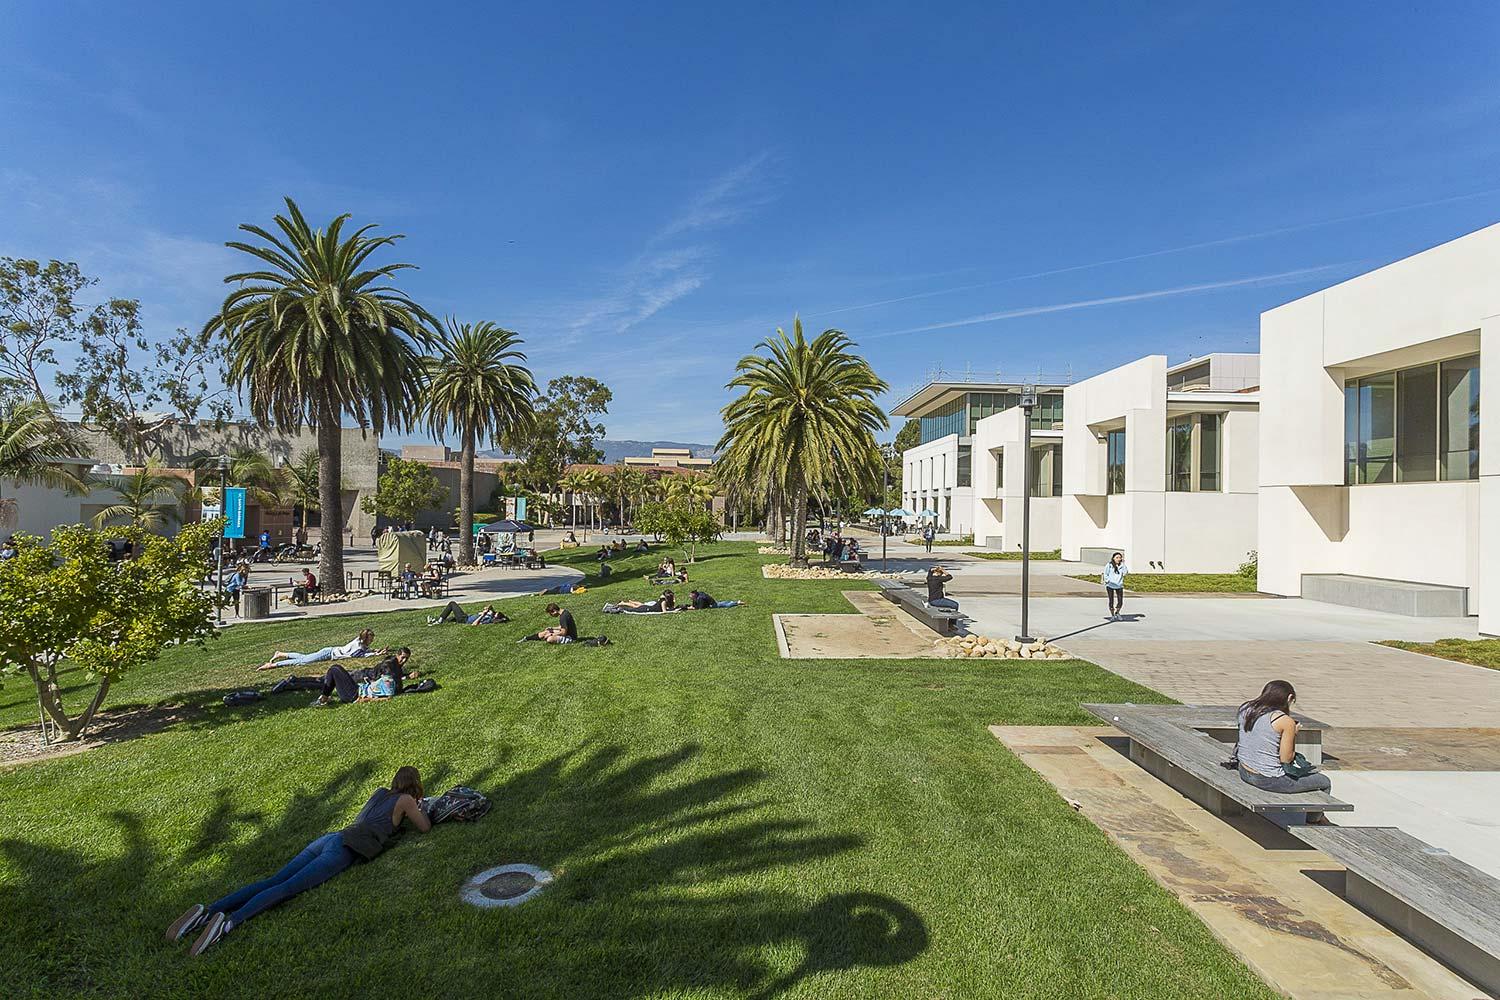 UCSB Library Lawn